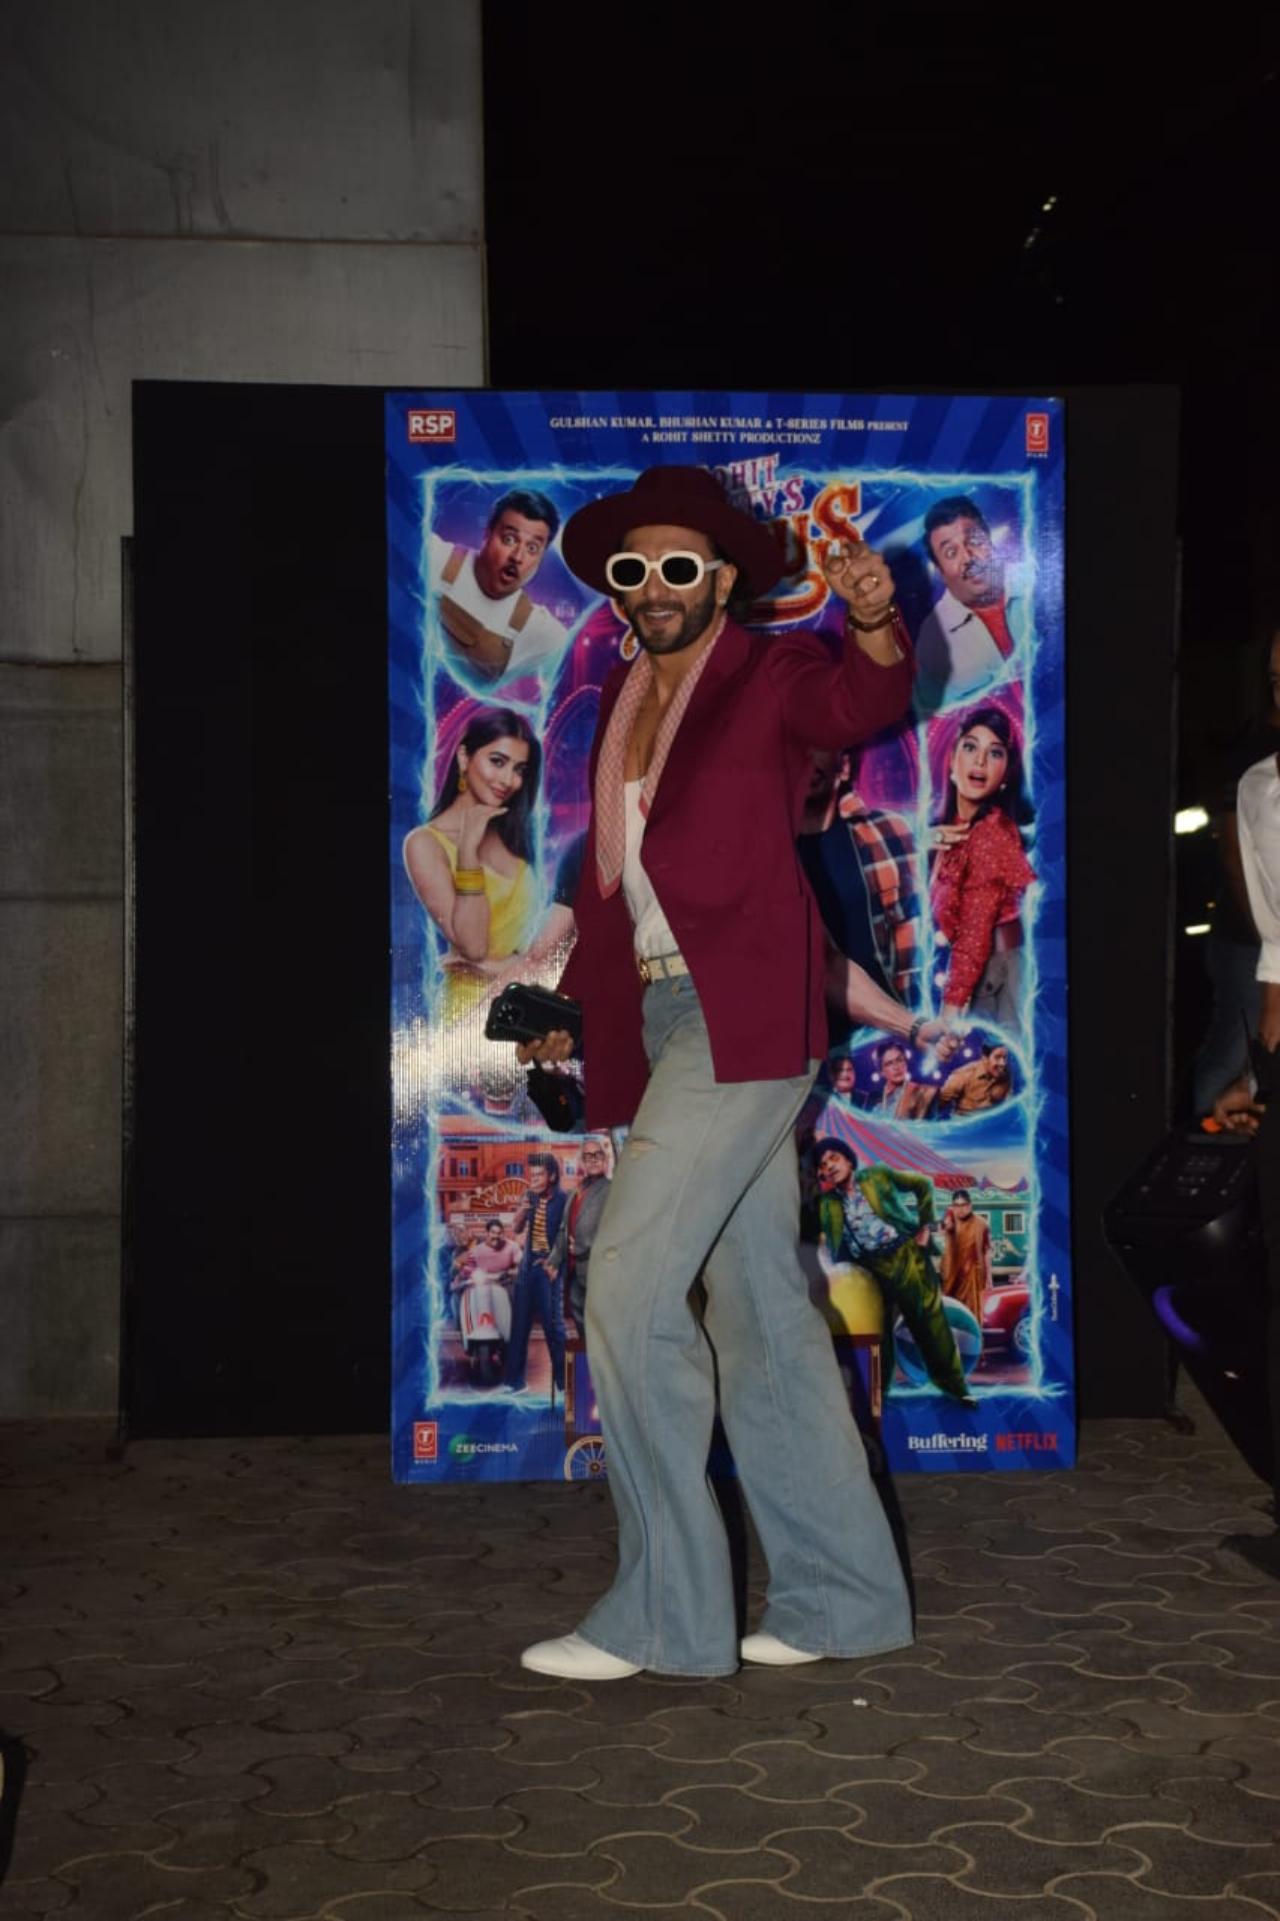 Actor Ranveer Singh was snapped at the screening in a magenta coat over a white T-shirt and light blue jeans. The ‘Gully Boy’ actor accessorized his look with a pink scarf, magenta hat and black and white sunglasses. He was seen waving at the paps